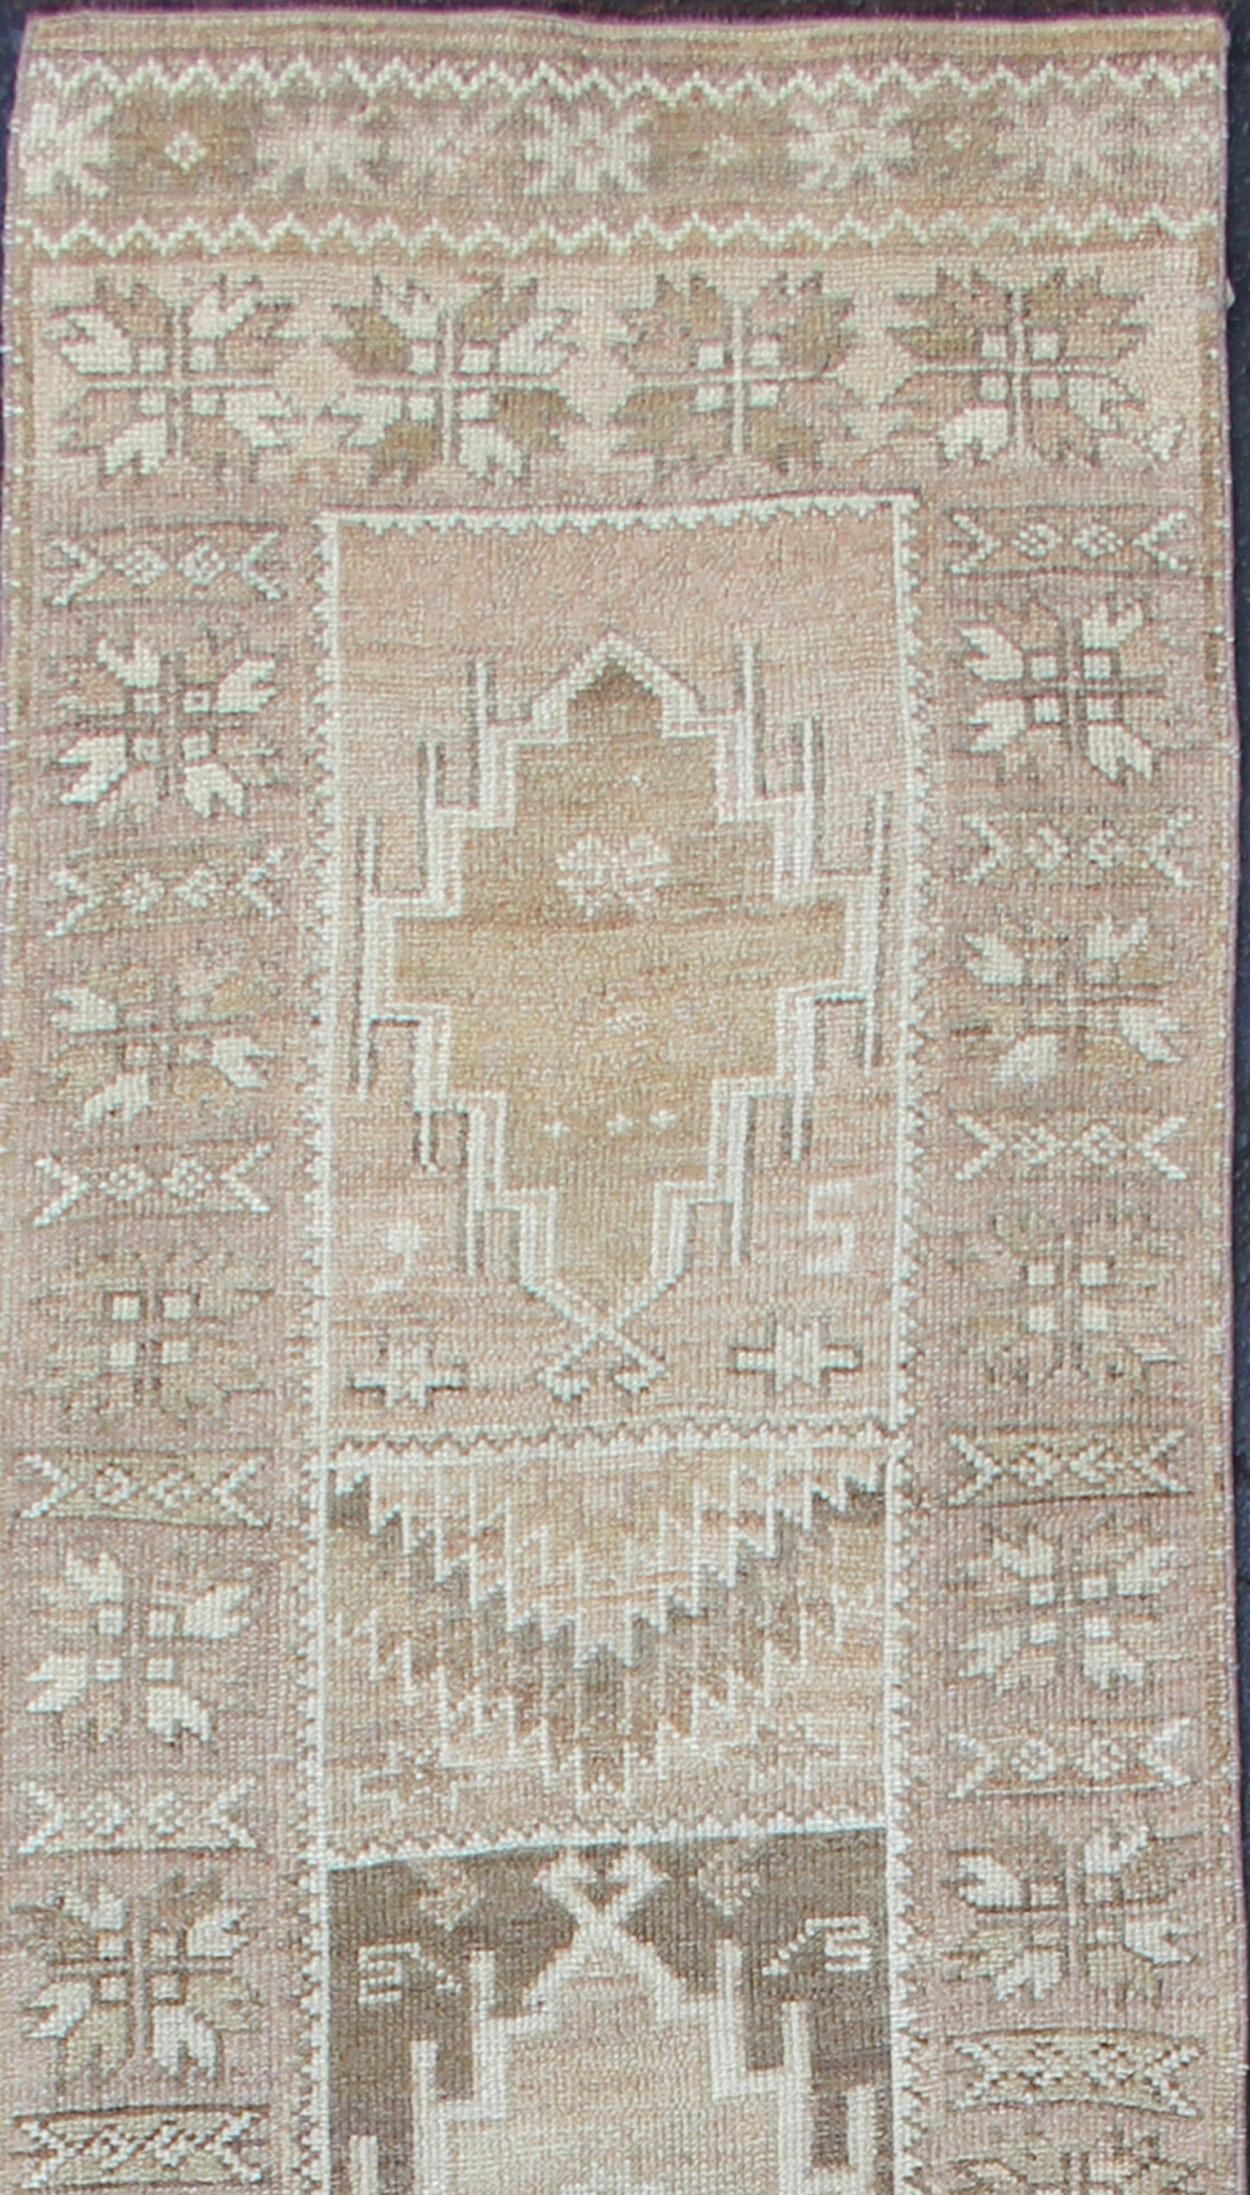 Vintage Oushak carpet with multi-medallion design in cream, taupe, light brown and earth tones, rug EN-179084, country of origin / type: Turkey / Oushak, circa 1950

This vintage Oushak carpet from mid-20th century Turkey features a